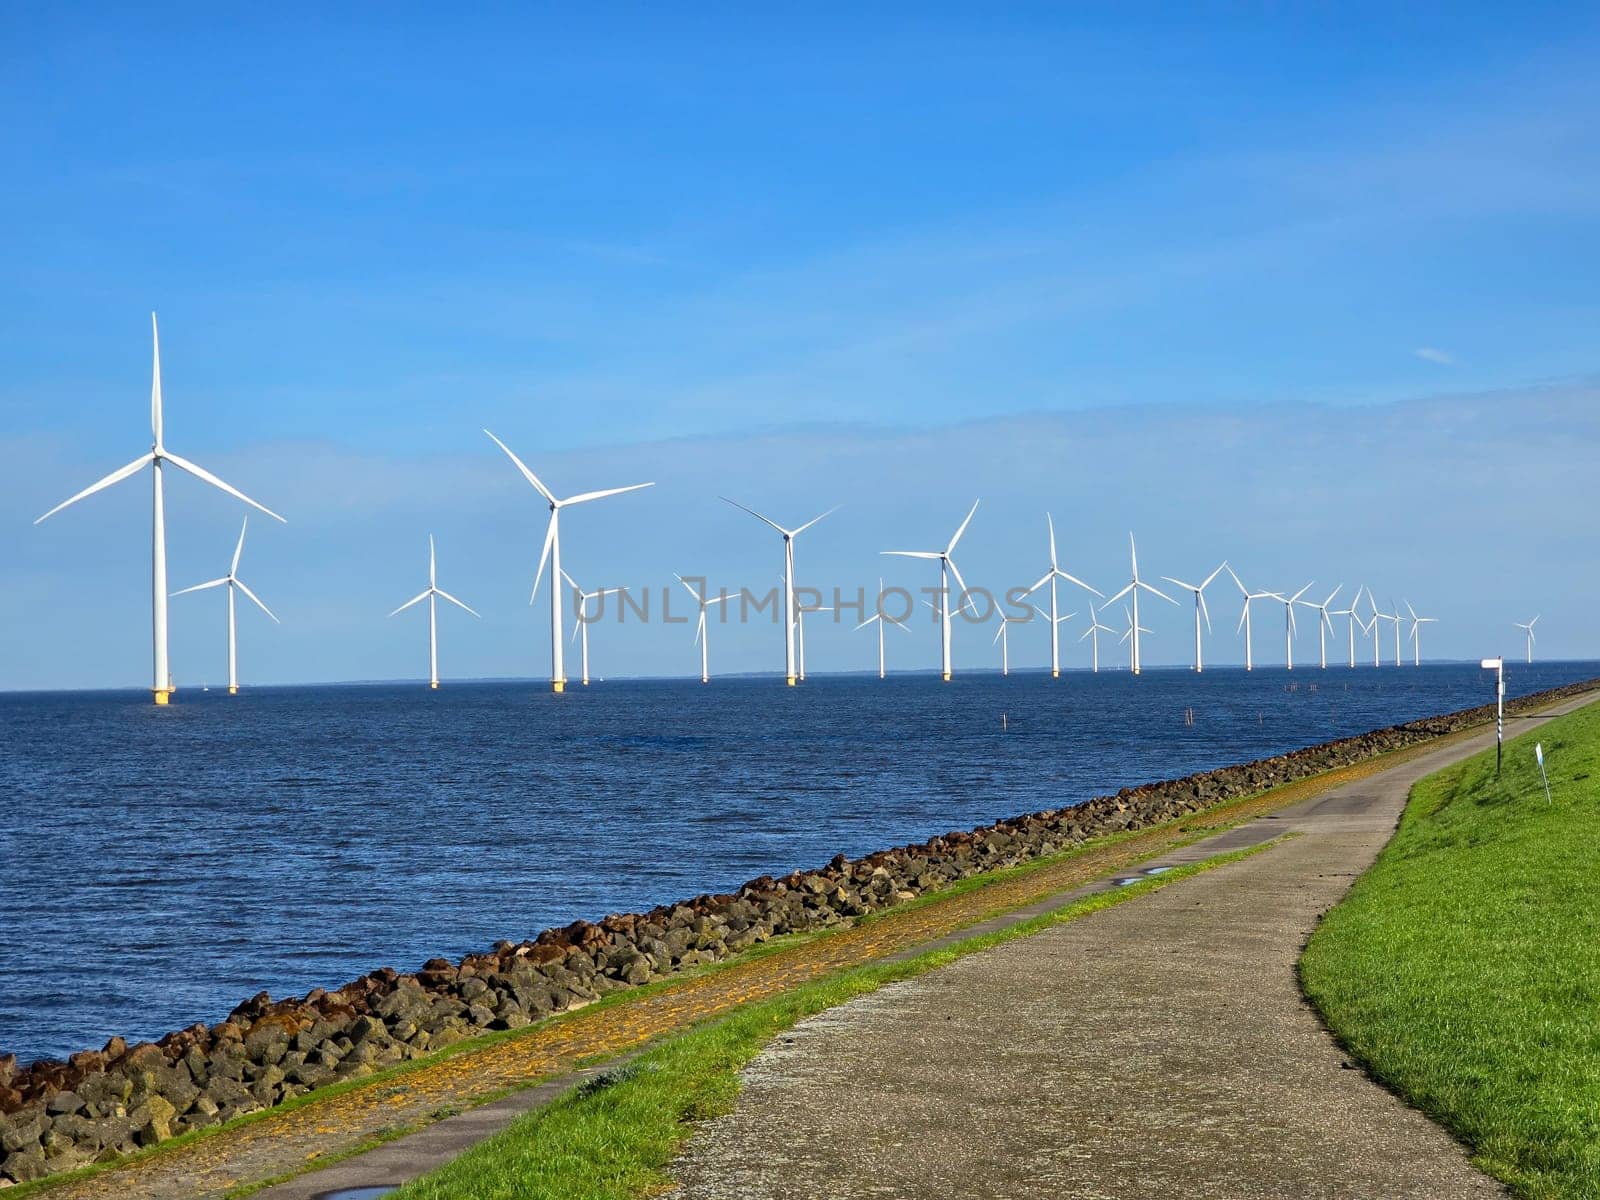 Windmill park in the ocean, view of windmill turbines on a Dutch dike, windmills isolated at sea in the Netherlands. Energy transition, zero emissions, carbon neutral, Earth day concept